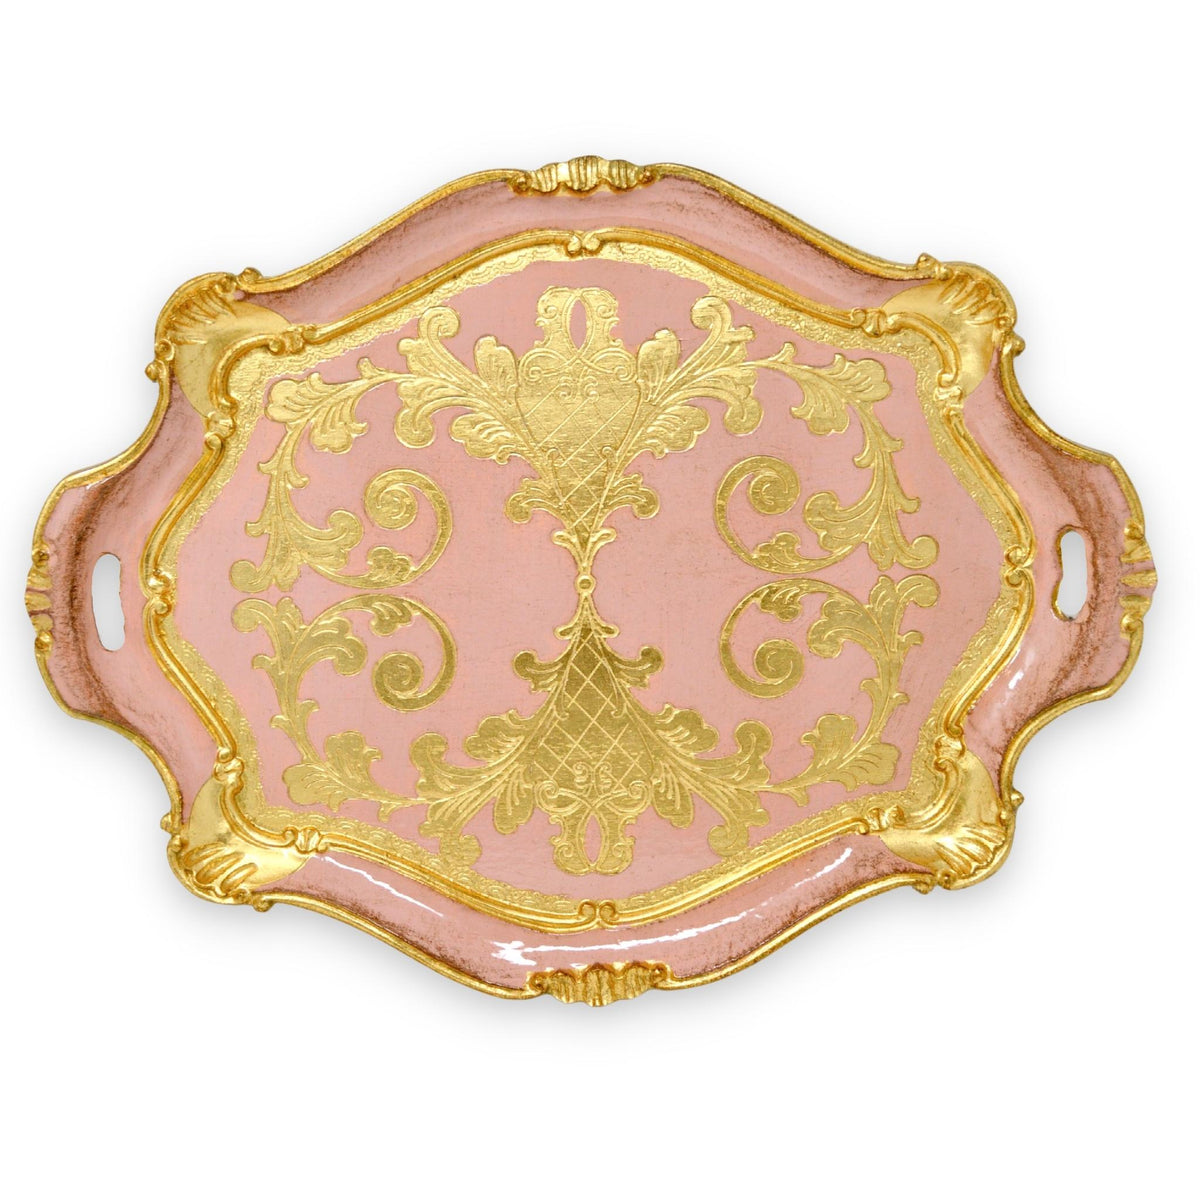 Florentine Carved Gilded Wood Tray, Large Oval With Handles, Made in Italy - My Italian Decor